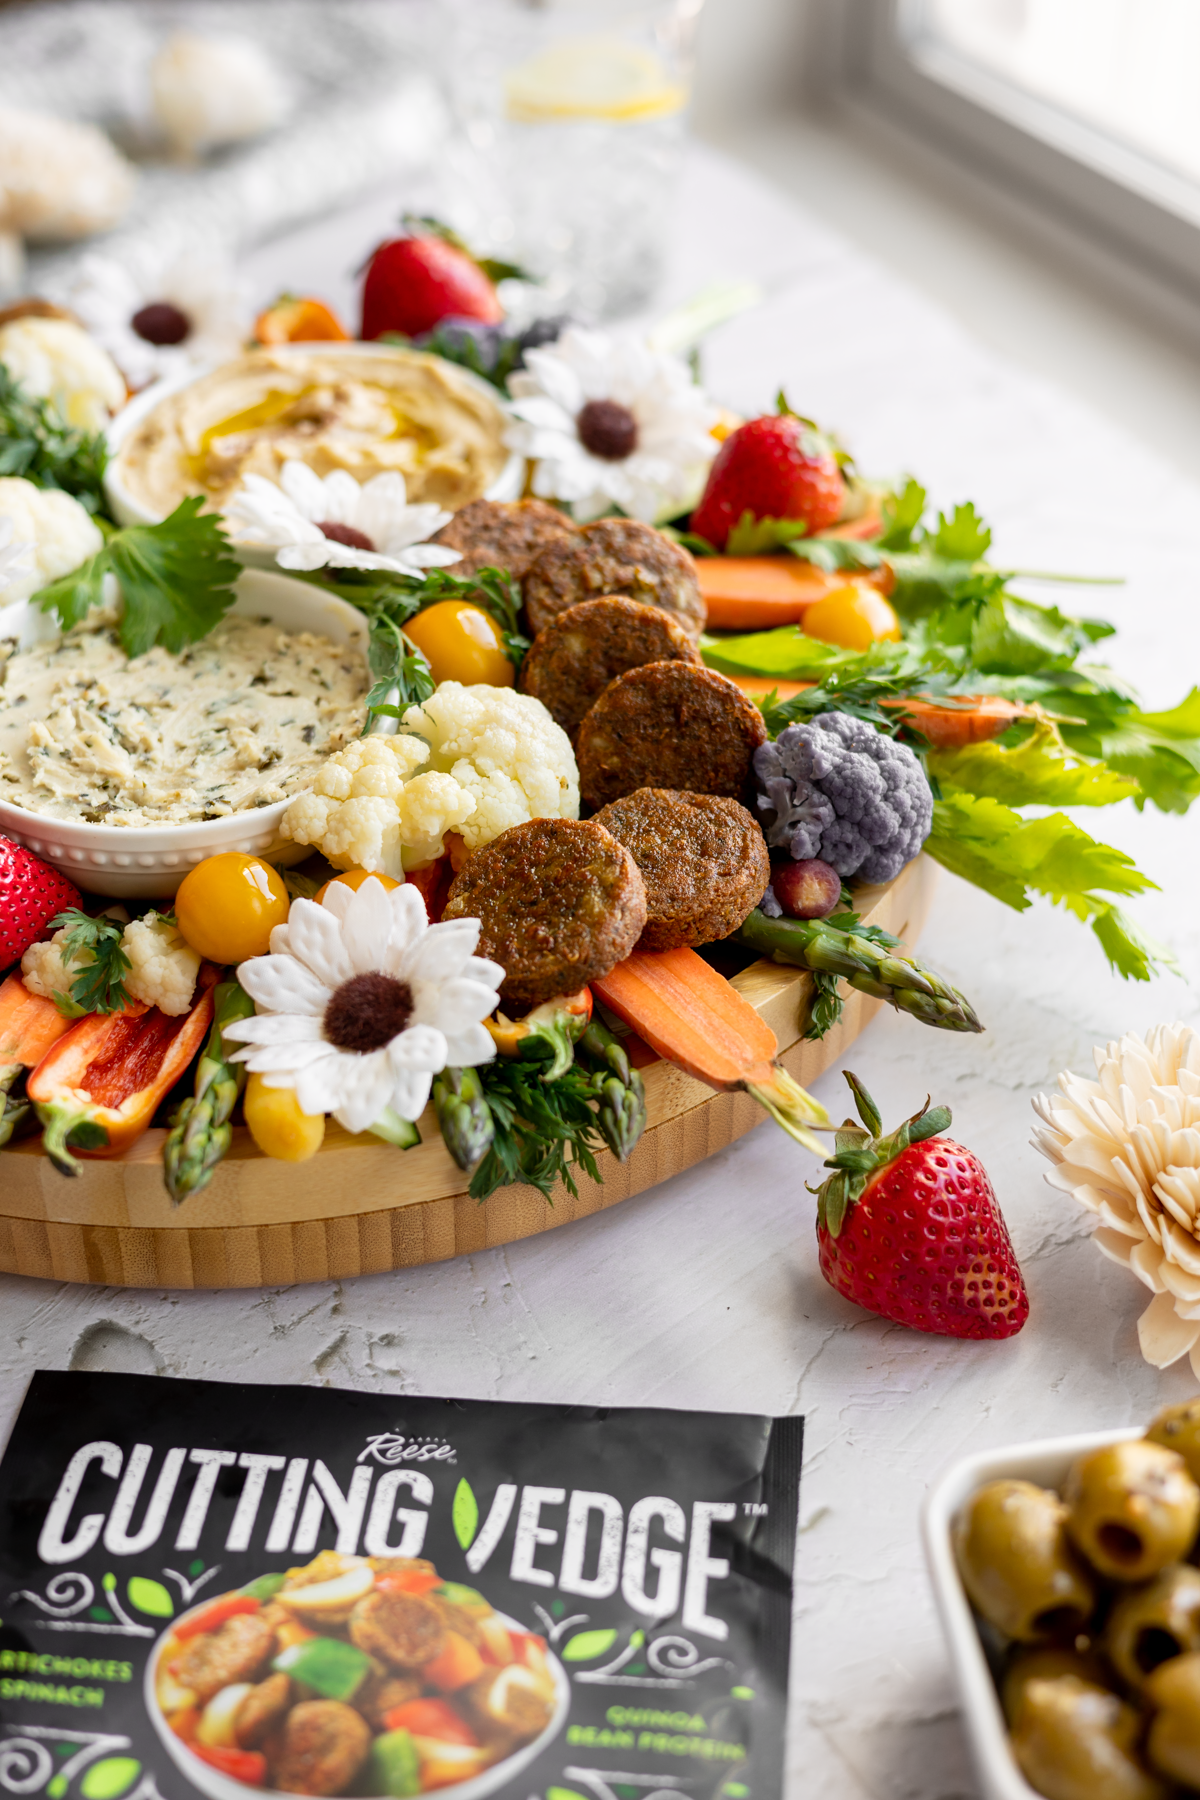 vegan spring crudité platter shown from the side with cutting vedge packaging in front of it